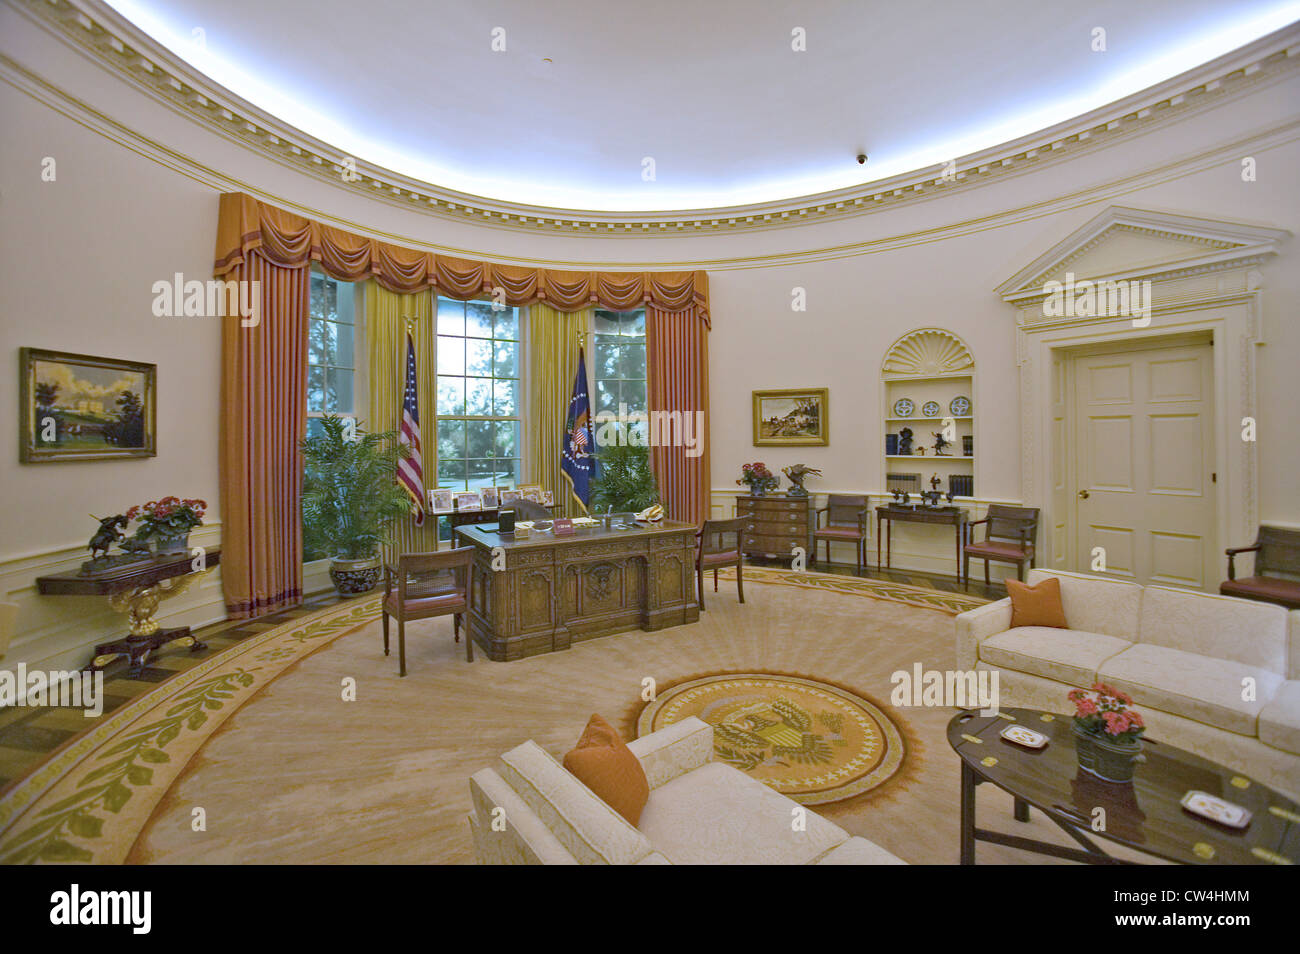 Replica of the White House Oval Office on display at the Ronald Reagan Presidential Library and Museum, Simi Valley, CA Stock Photo